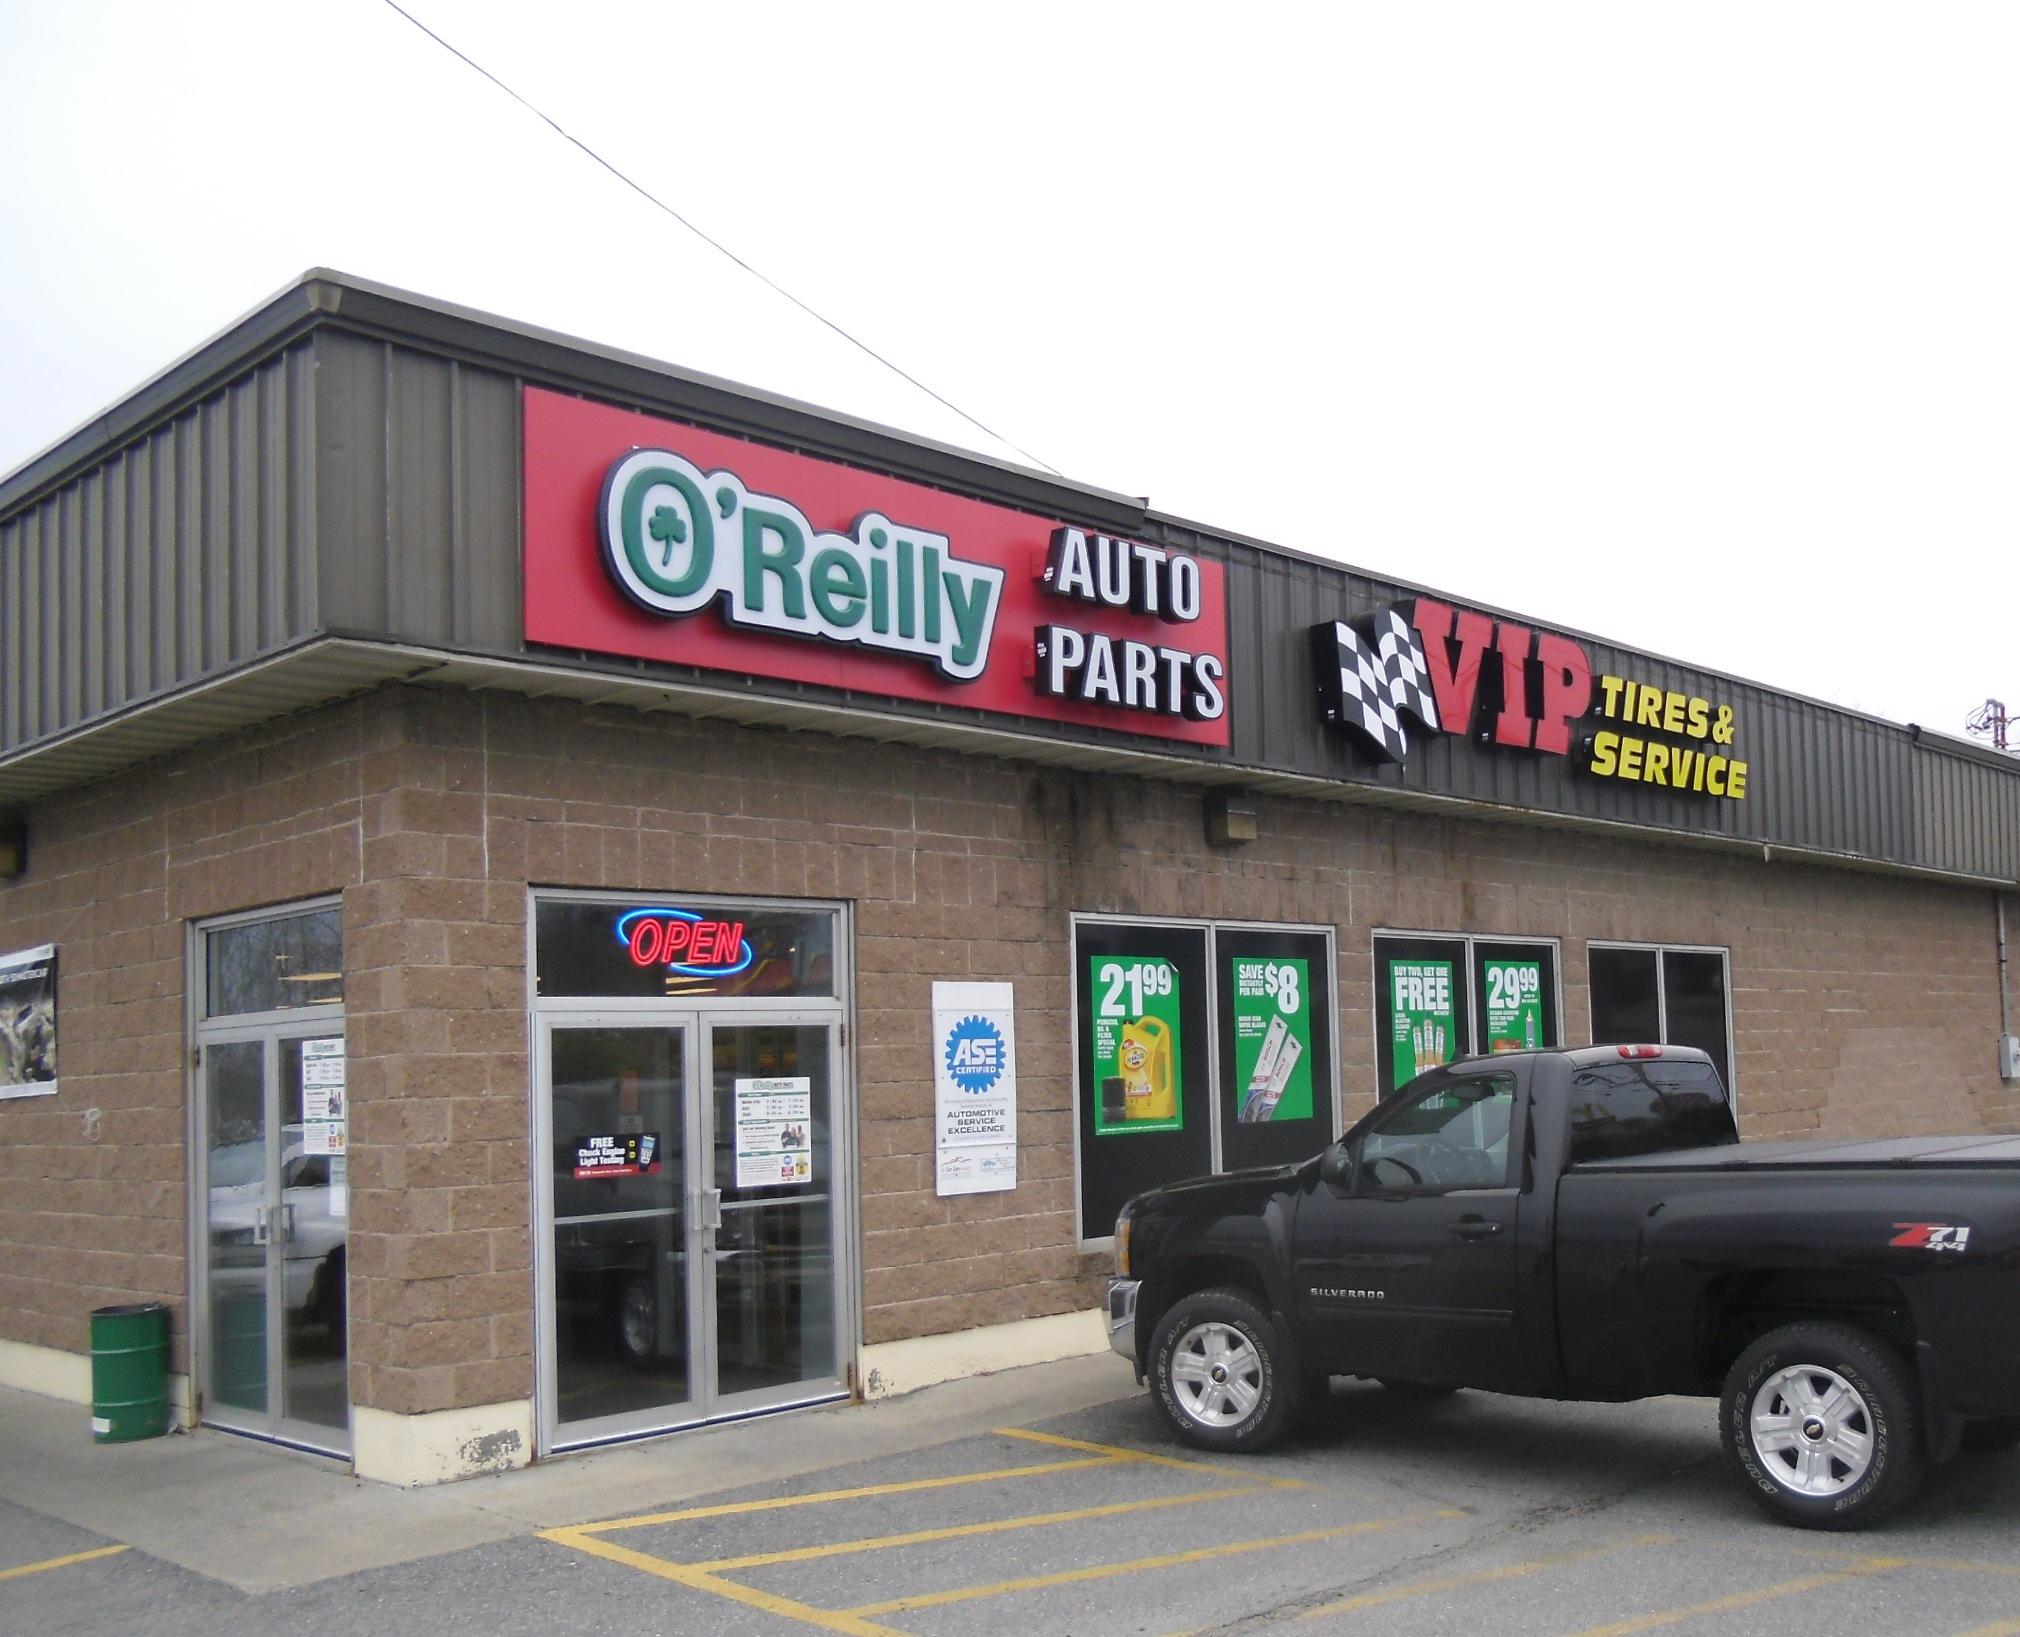 O'Reilly Auto Parts Coupons near me in Waterville | 8coupons